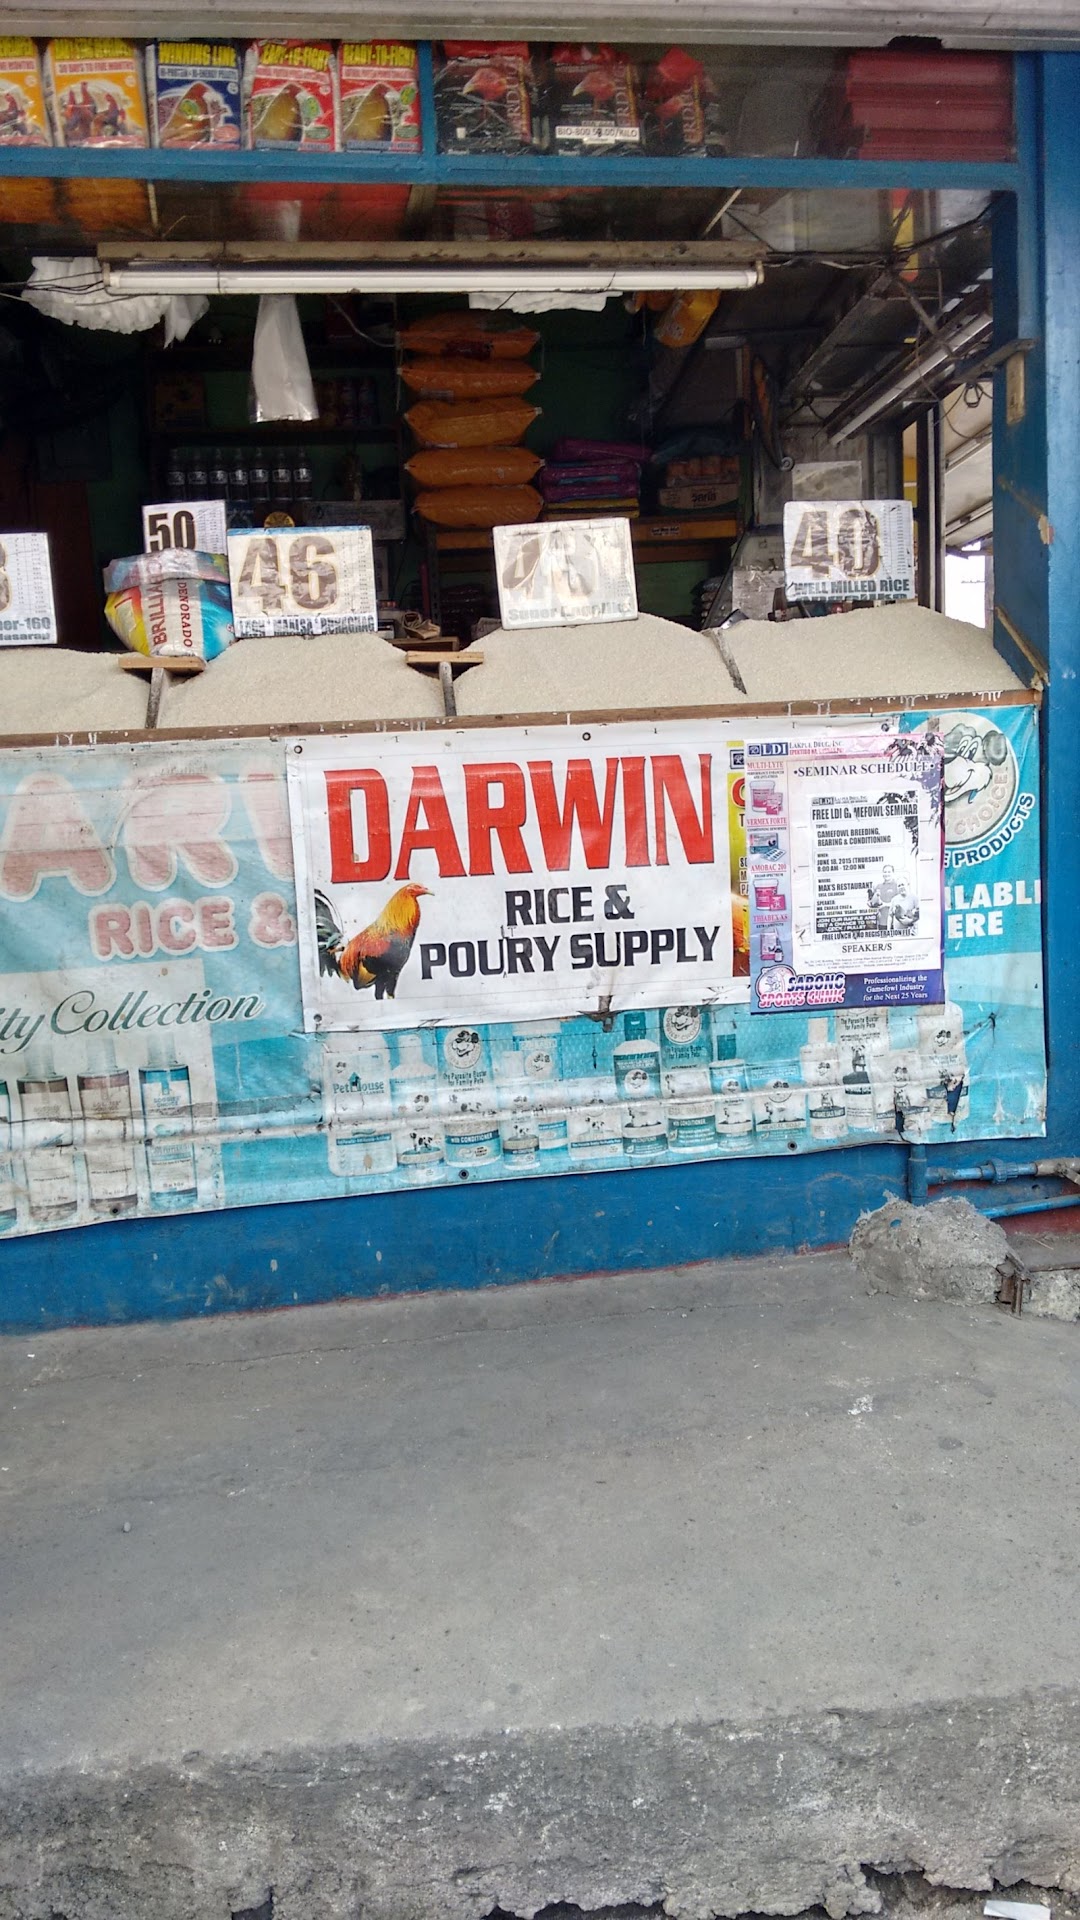 Darwins Rice And Poultry Supply